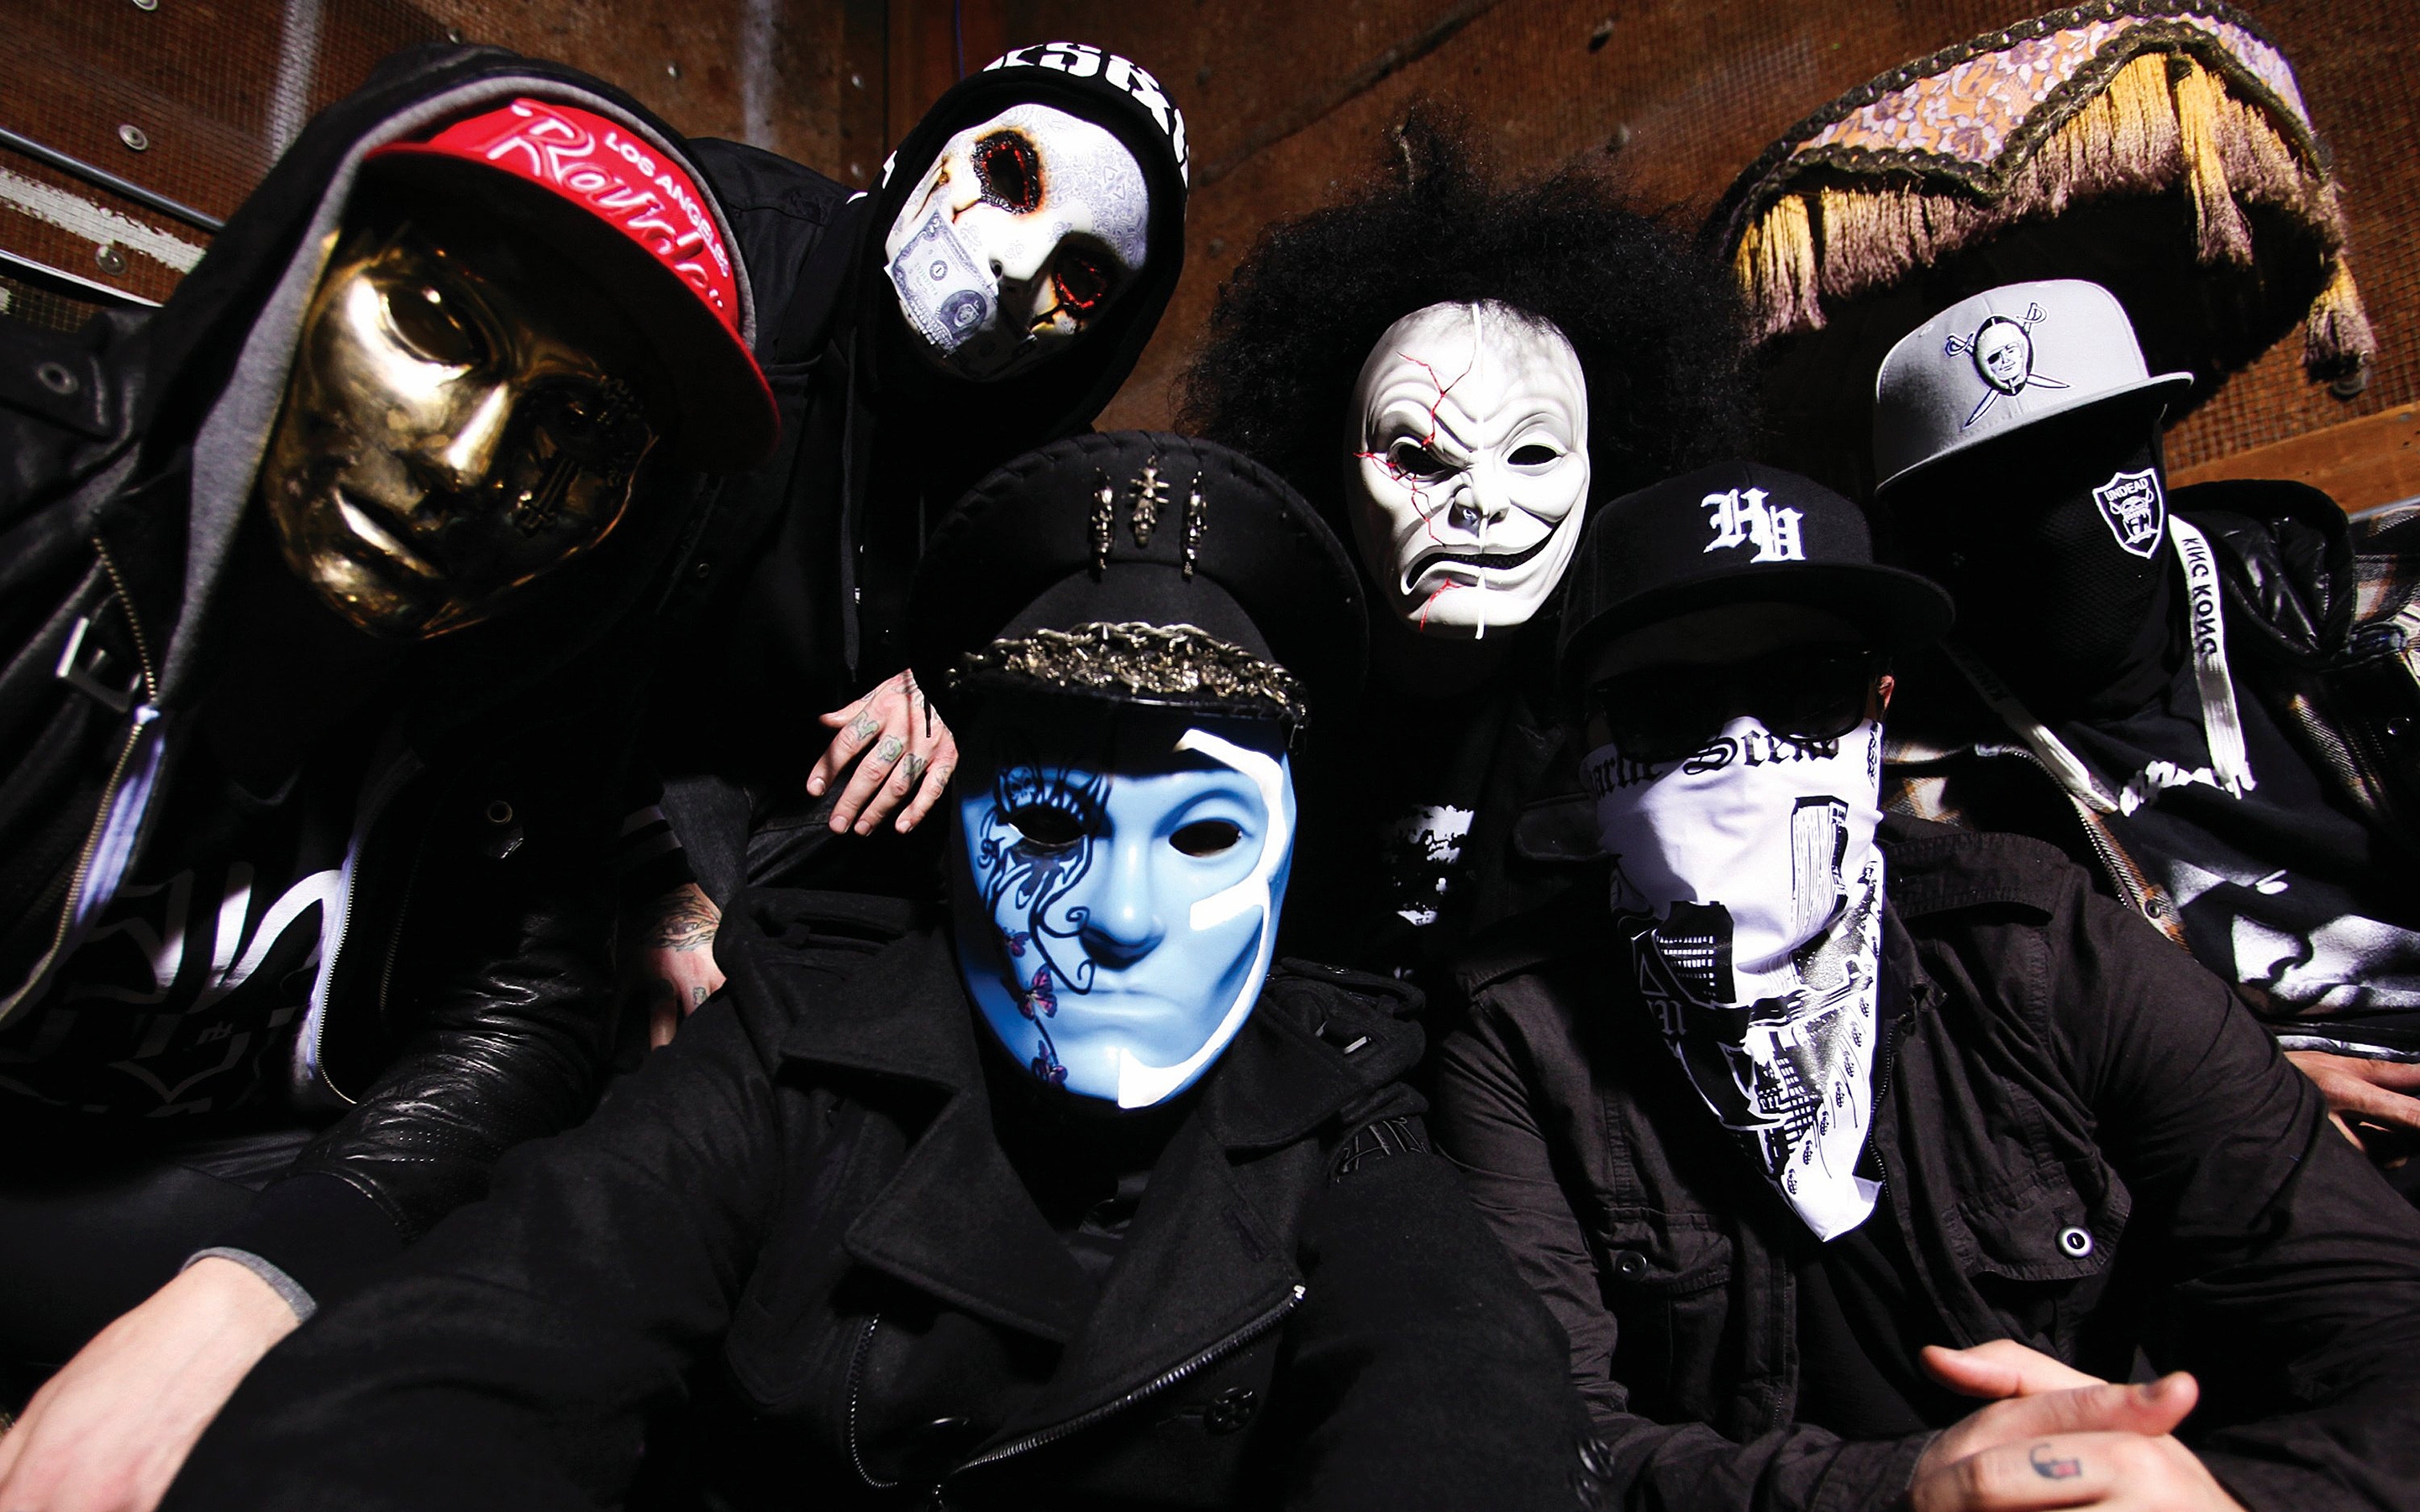 Hollywood Undead for 2880 x 1800 Retina Display resolution